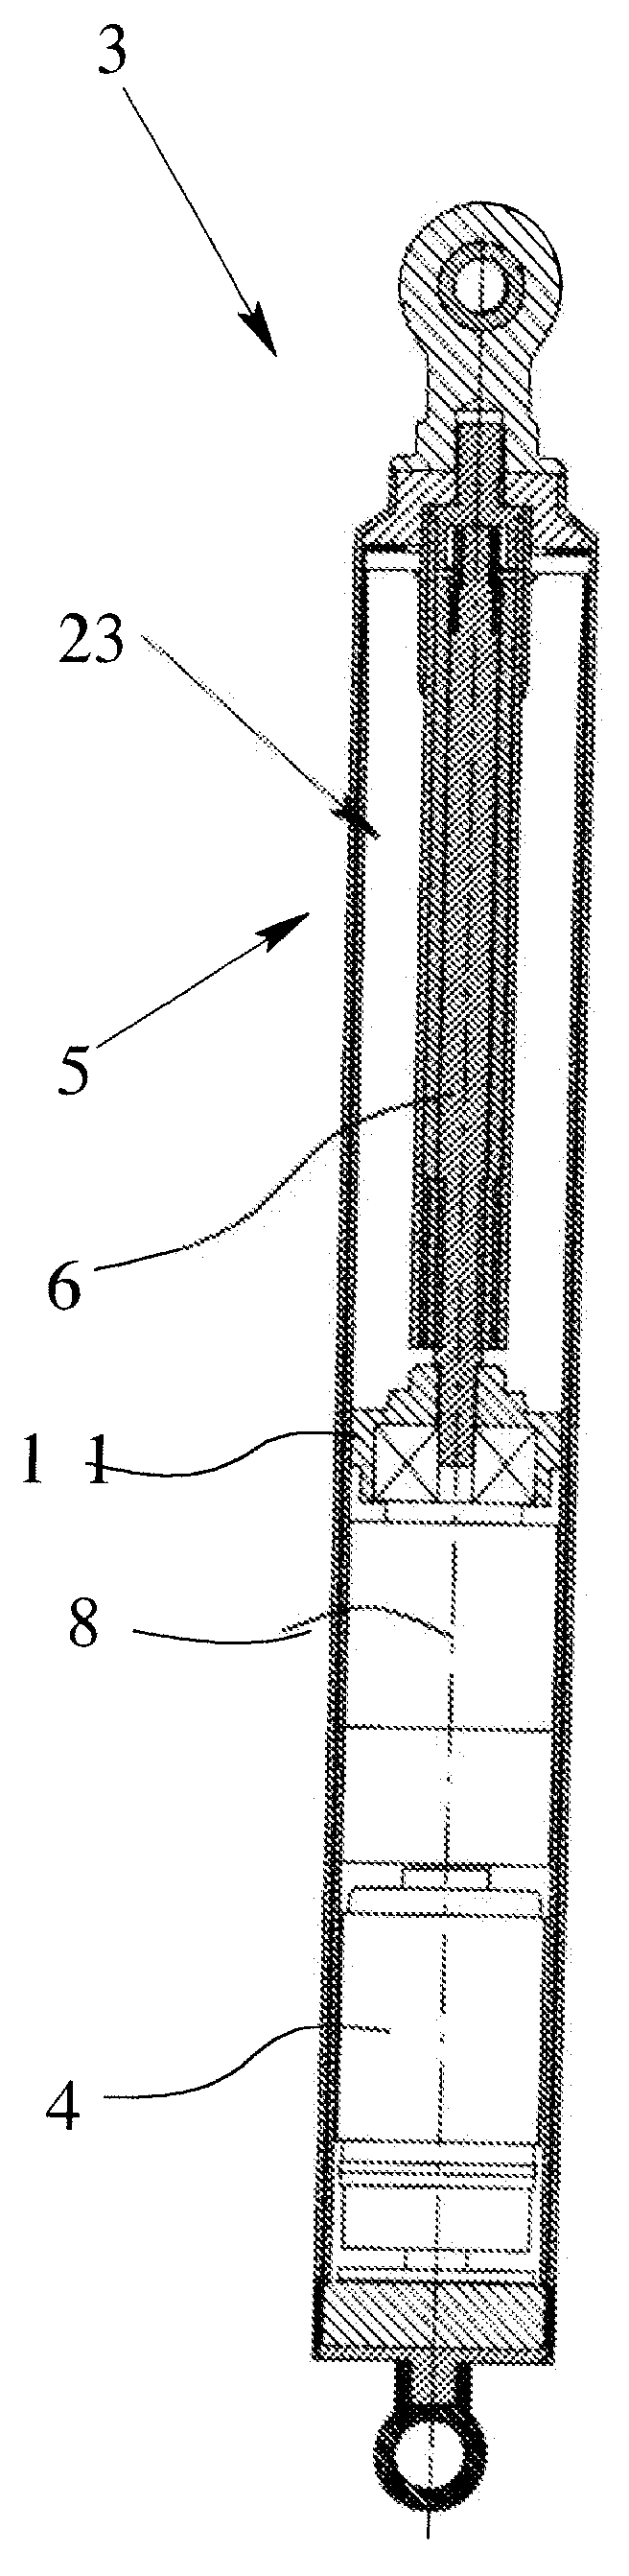 Drive arrangement for motorized actuation of a functional element in a motor vehicle